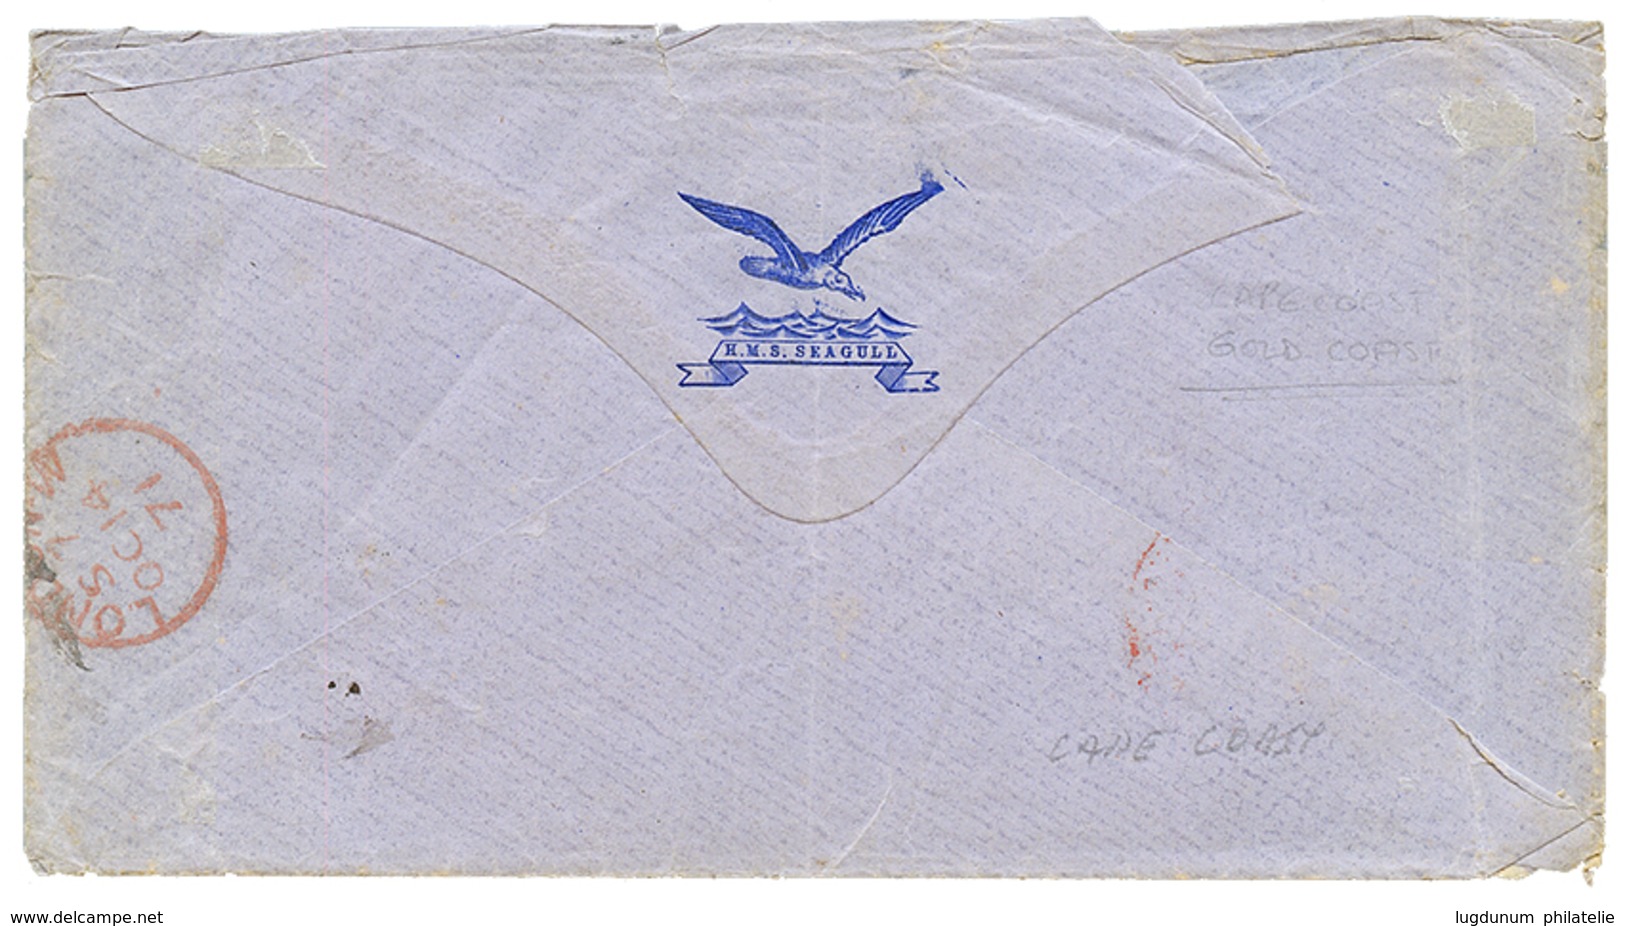 "H.M.S SEAGULL - CAPE COAST" : 1871 GB 6d Canc. 466 + LIVERPOOL BR.PACKET On Envelope With Text Datelined "CAPE COAST" T - Côte D'Or (...-1957)